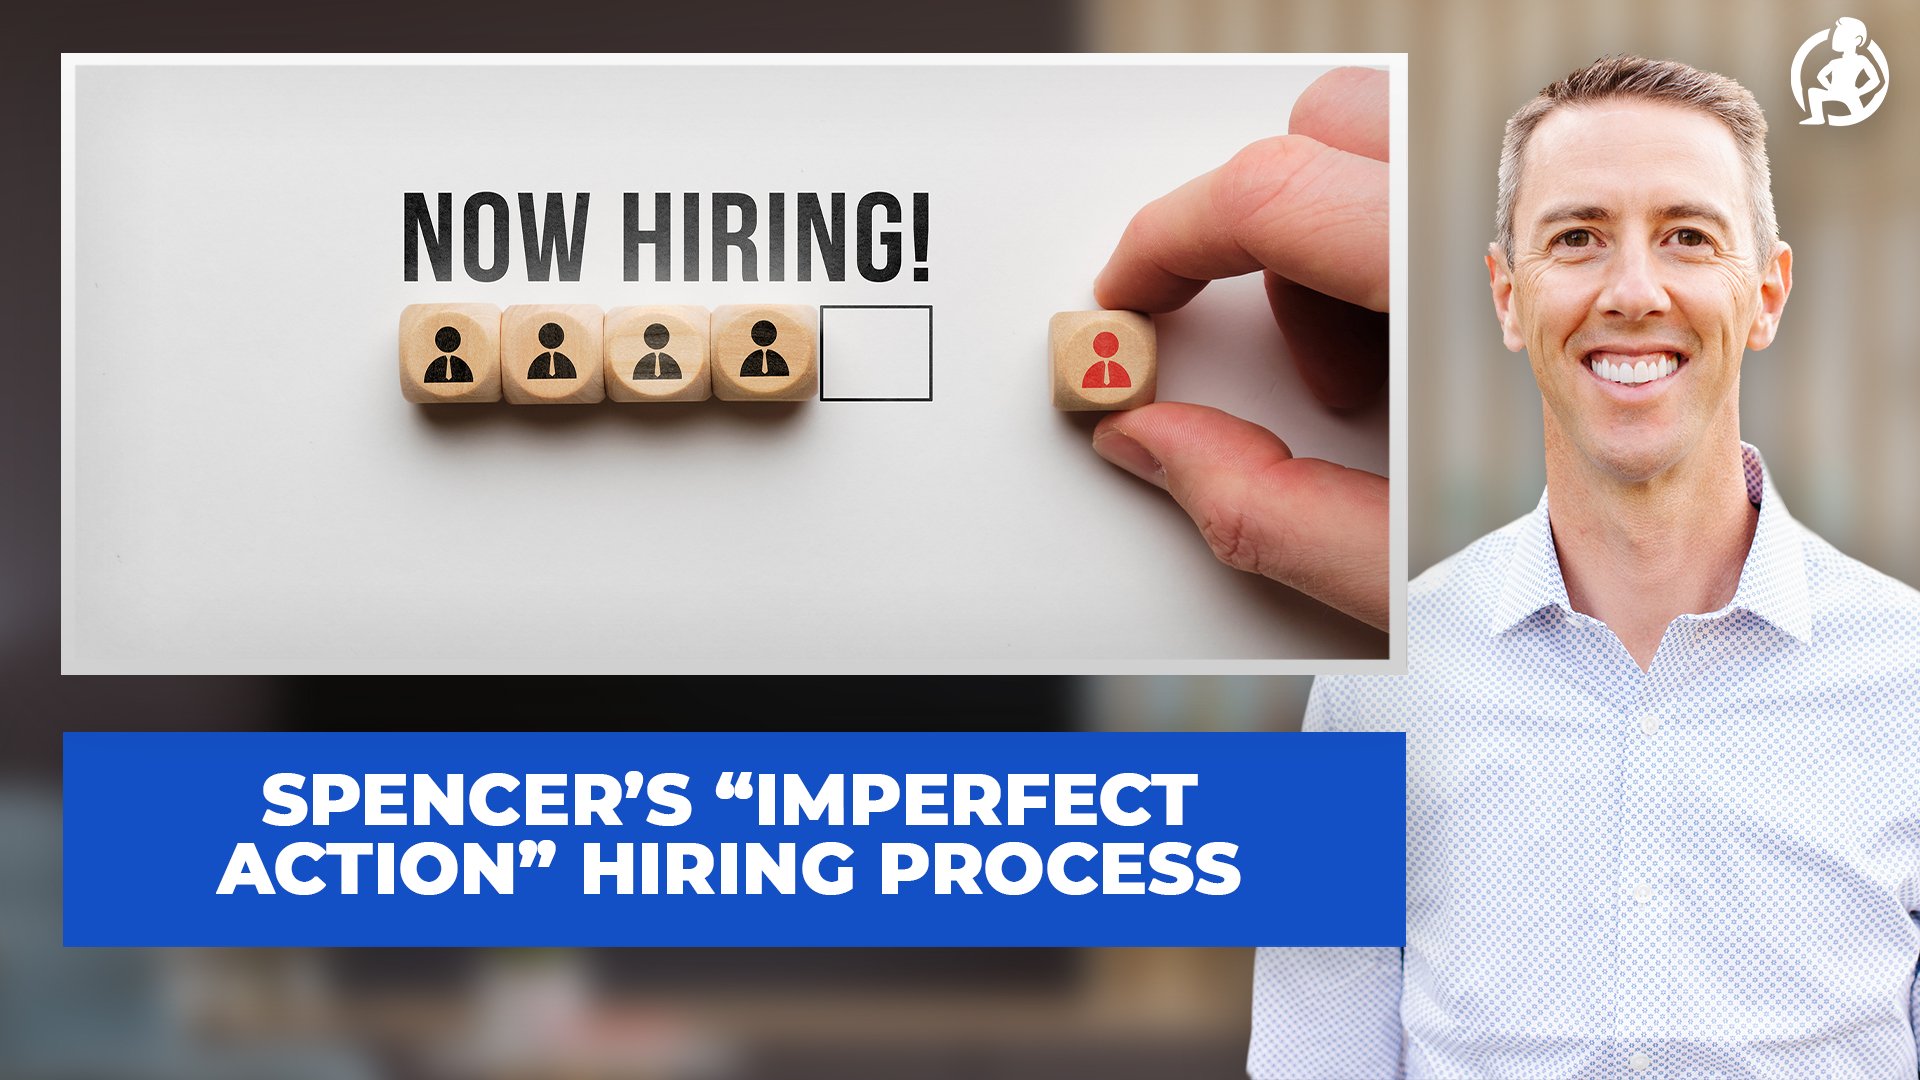 Spencer’s “Imperfect Action” Hiring Process